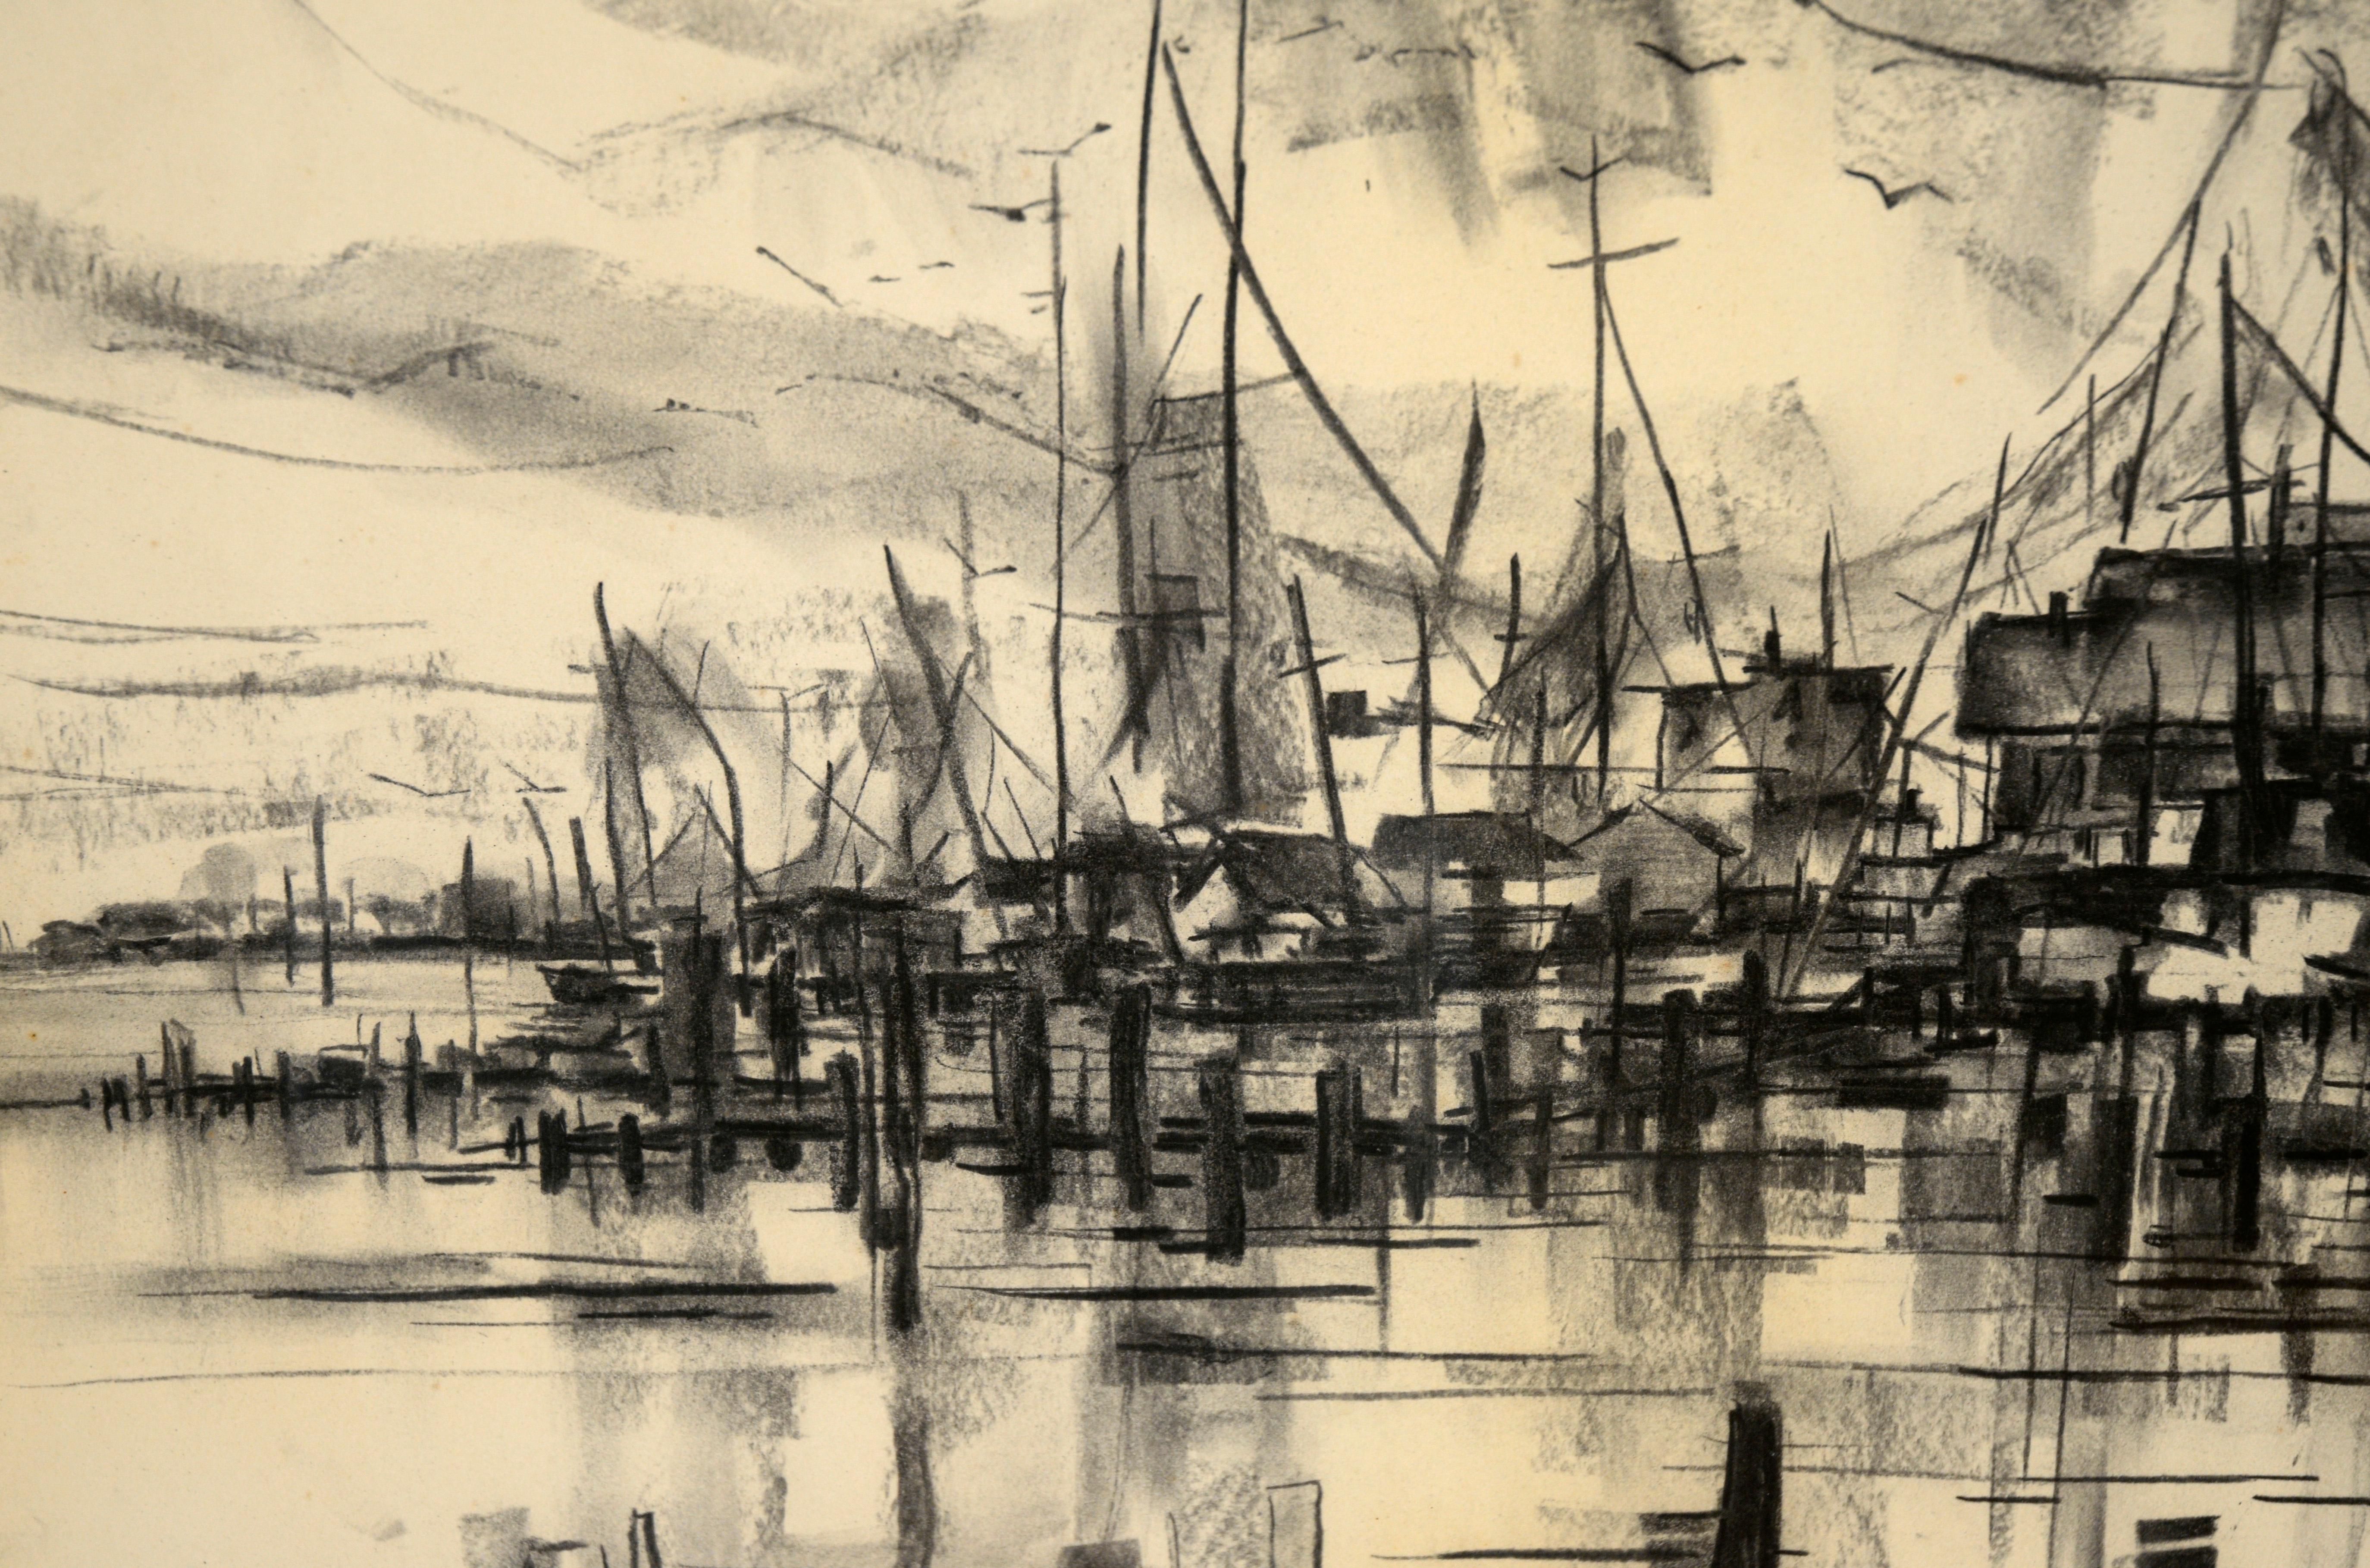 Ships at the Harbor - Nautical Seascape in Charcoal on Paper

Detailed and layered harbor scene by Maude Folmar Ramsey (American, 1908-1993). The viewer is looking out at the harbor, across the water from the docks, buildings, and ships. The